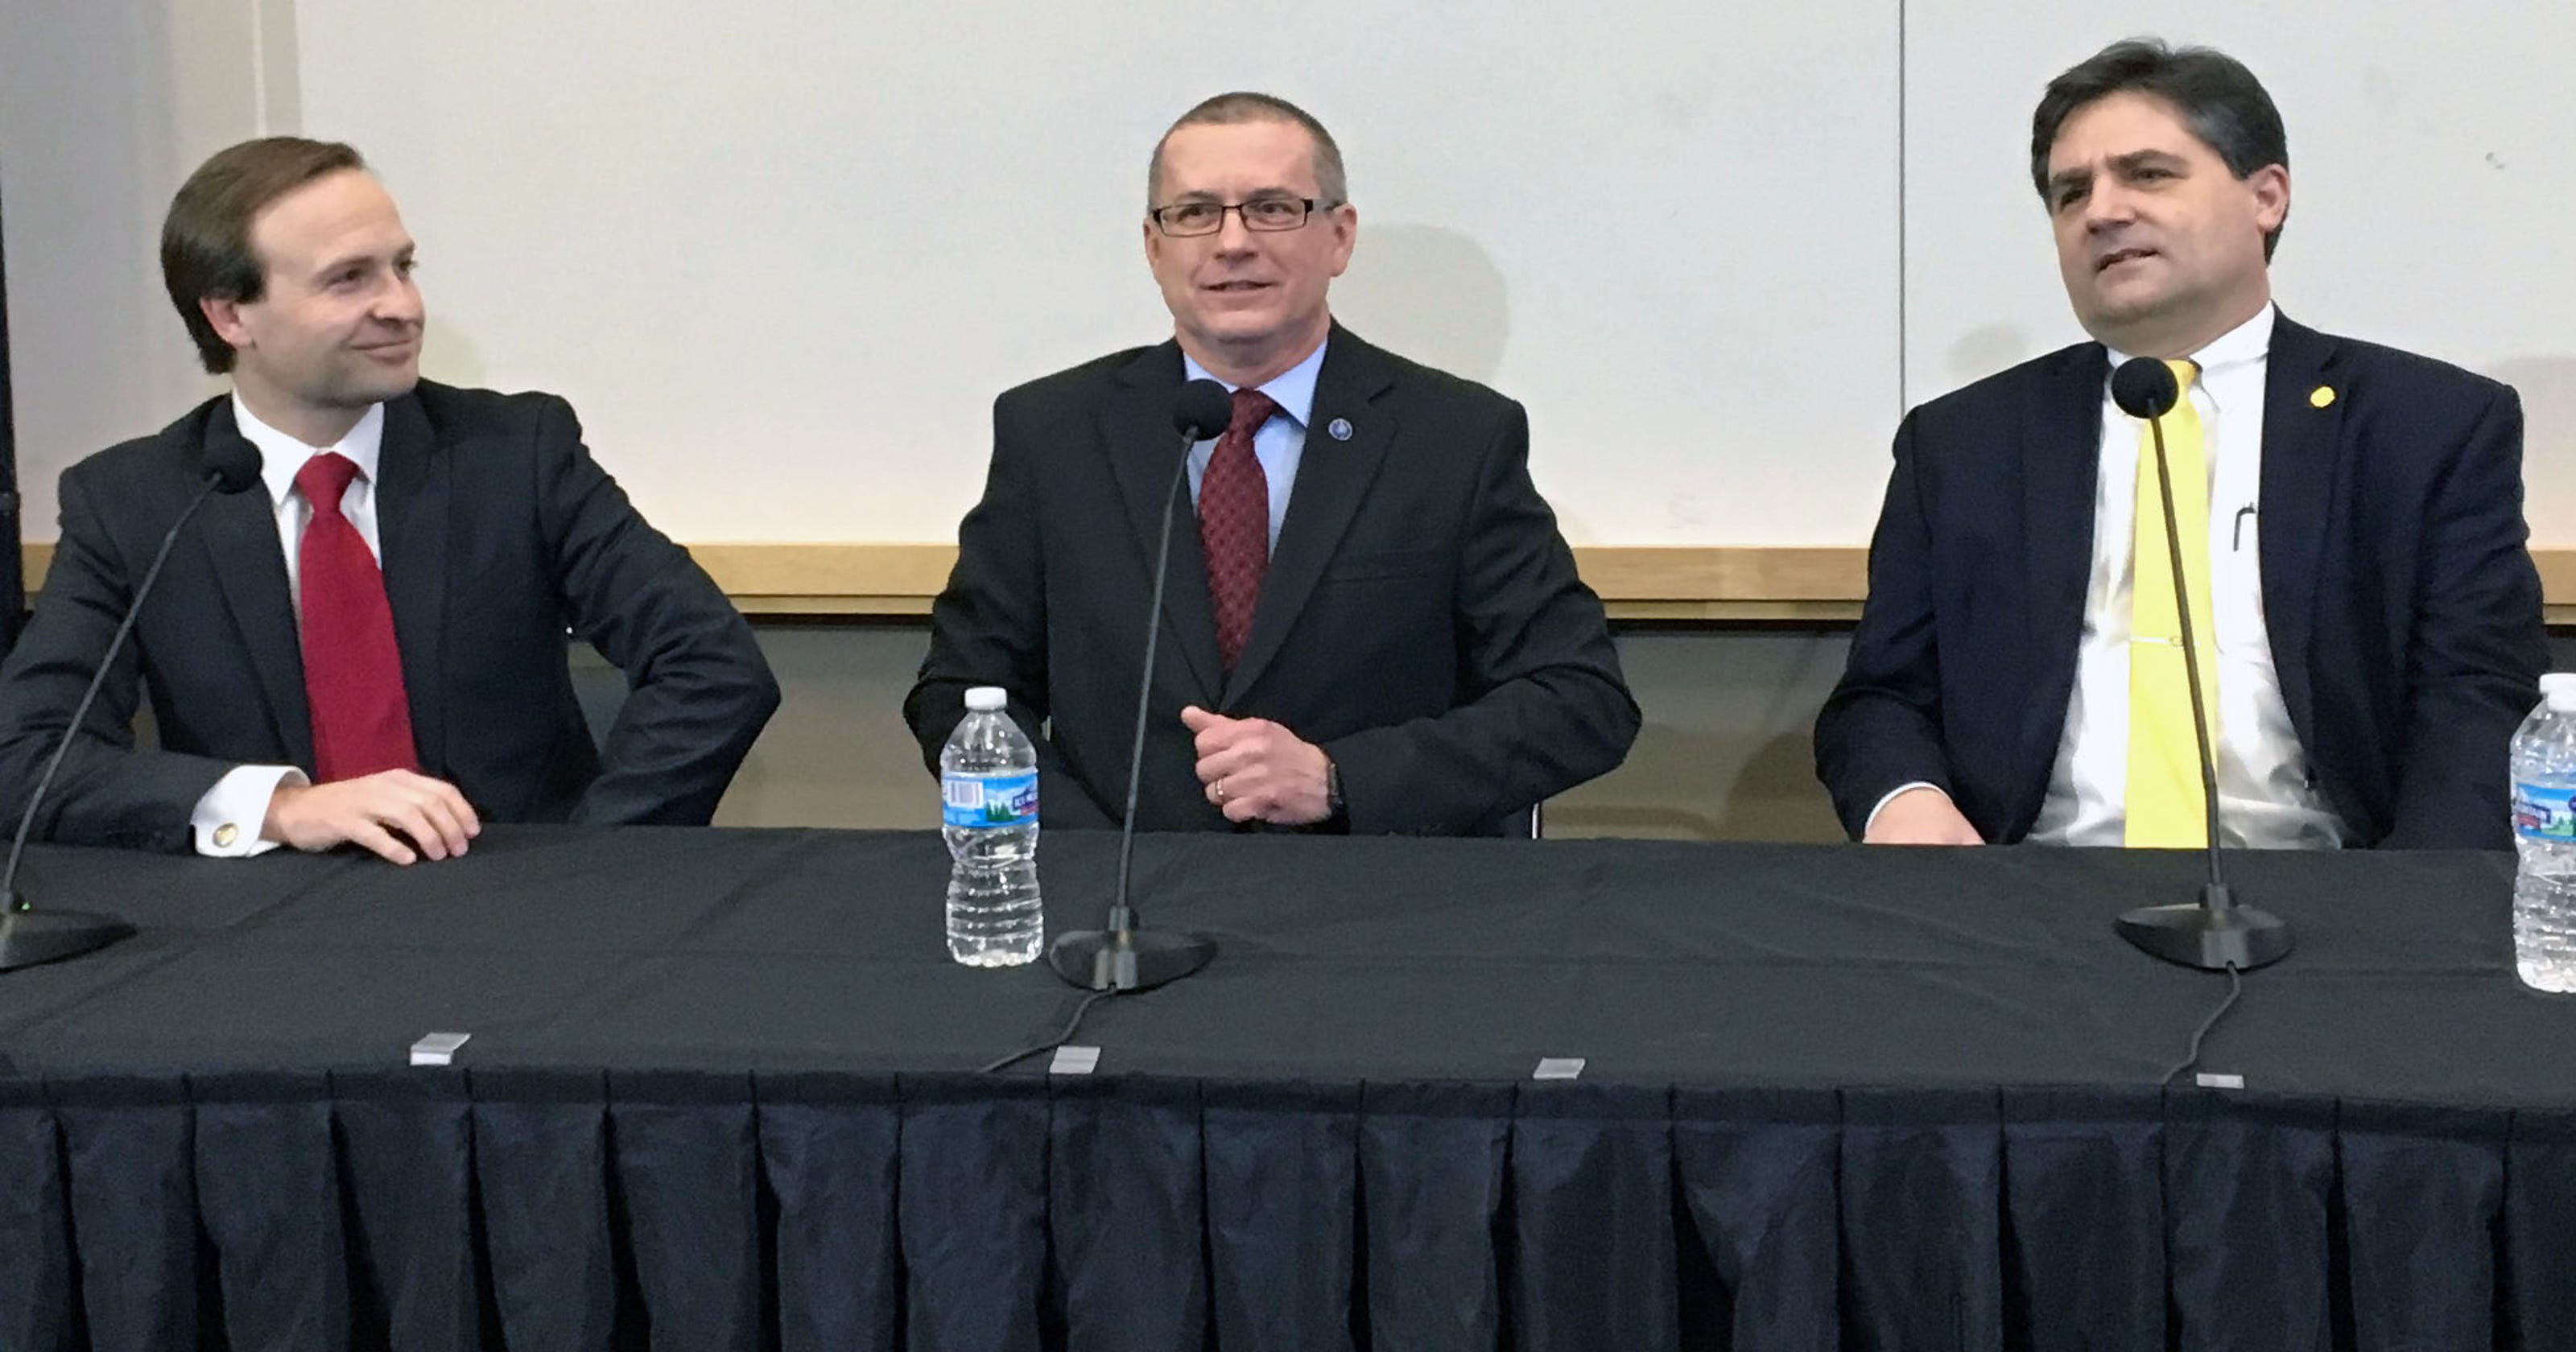 Three GOP candidates for Governor talk issues at Troy town hall forum3200 x 1680